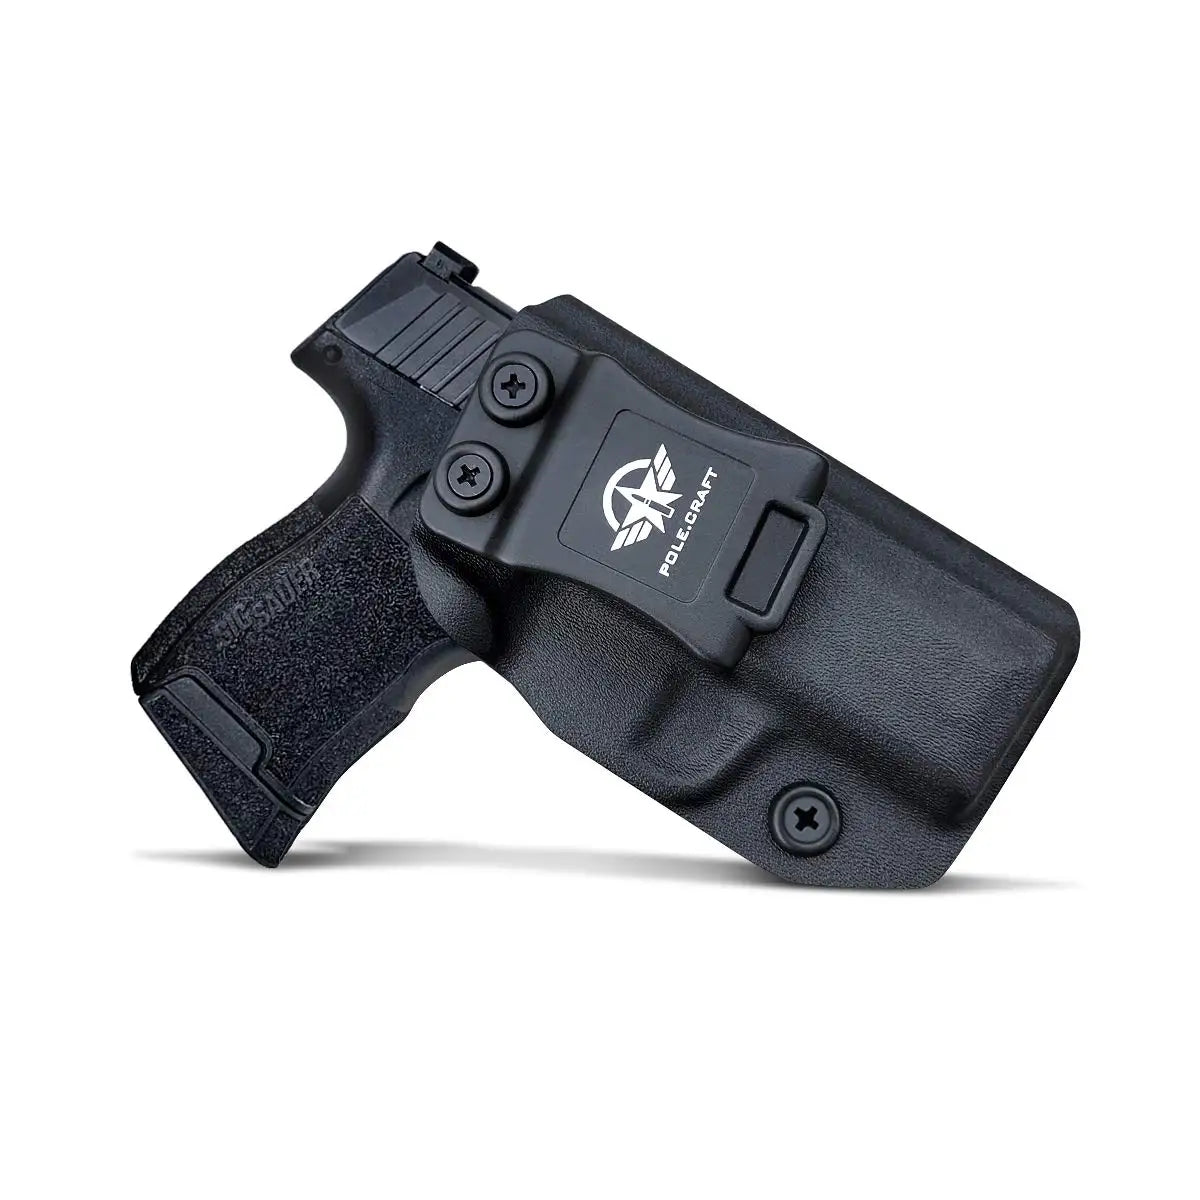 Sig Sauer P-Series Kydex Concealment Holster | Inside Waistband Kydex Concealed Carry Holster by Rounded | IWB Kydex Holster | Black